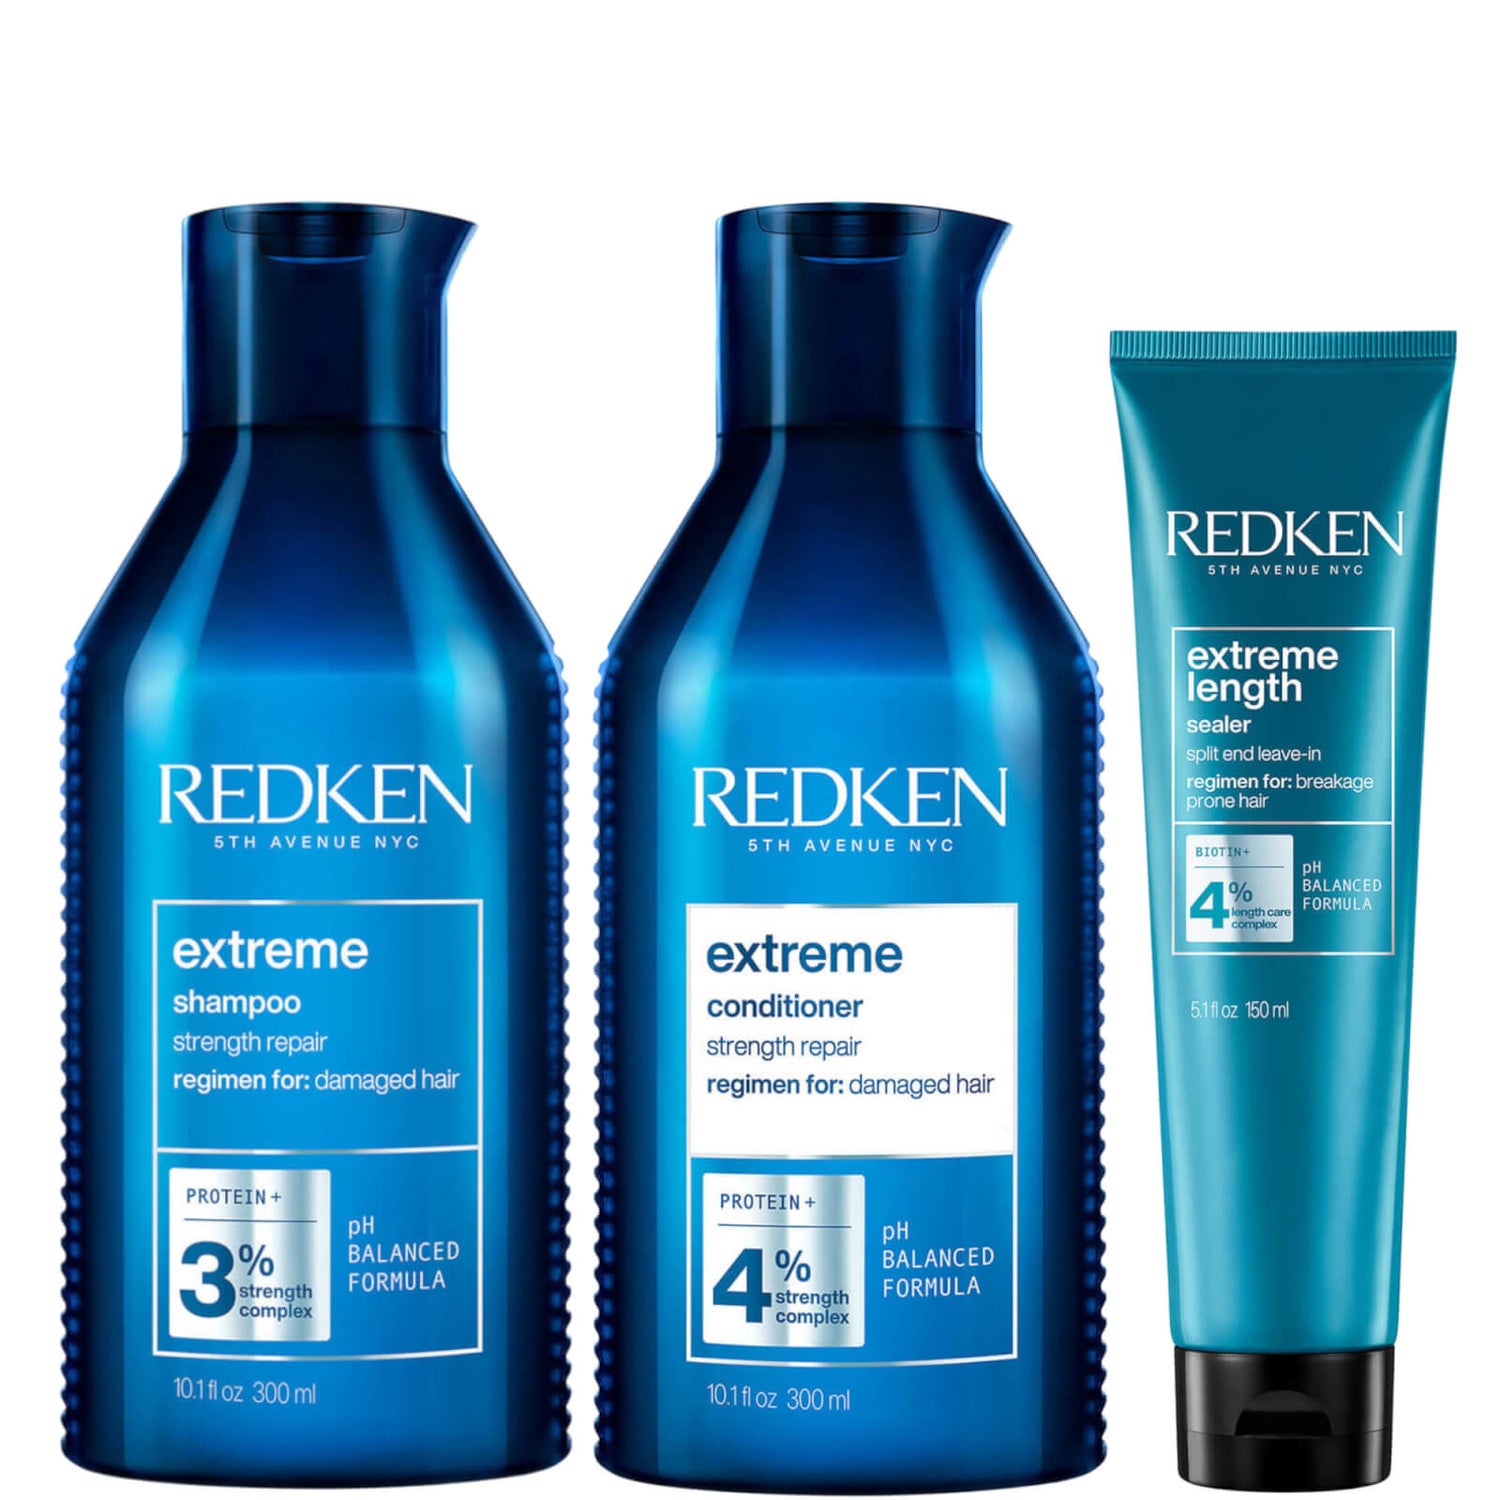 Redken Extreme Shampoo, Conditioner and Extreme Length Sealer Leave-in Treatment Bundle